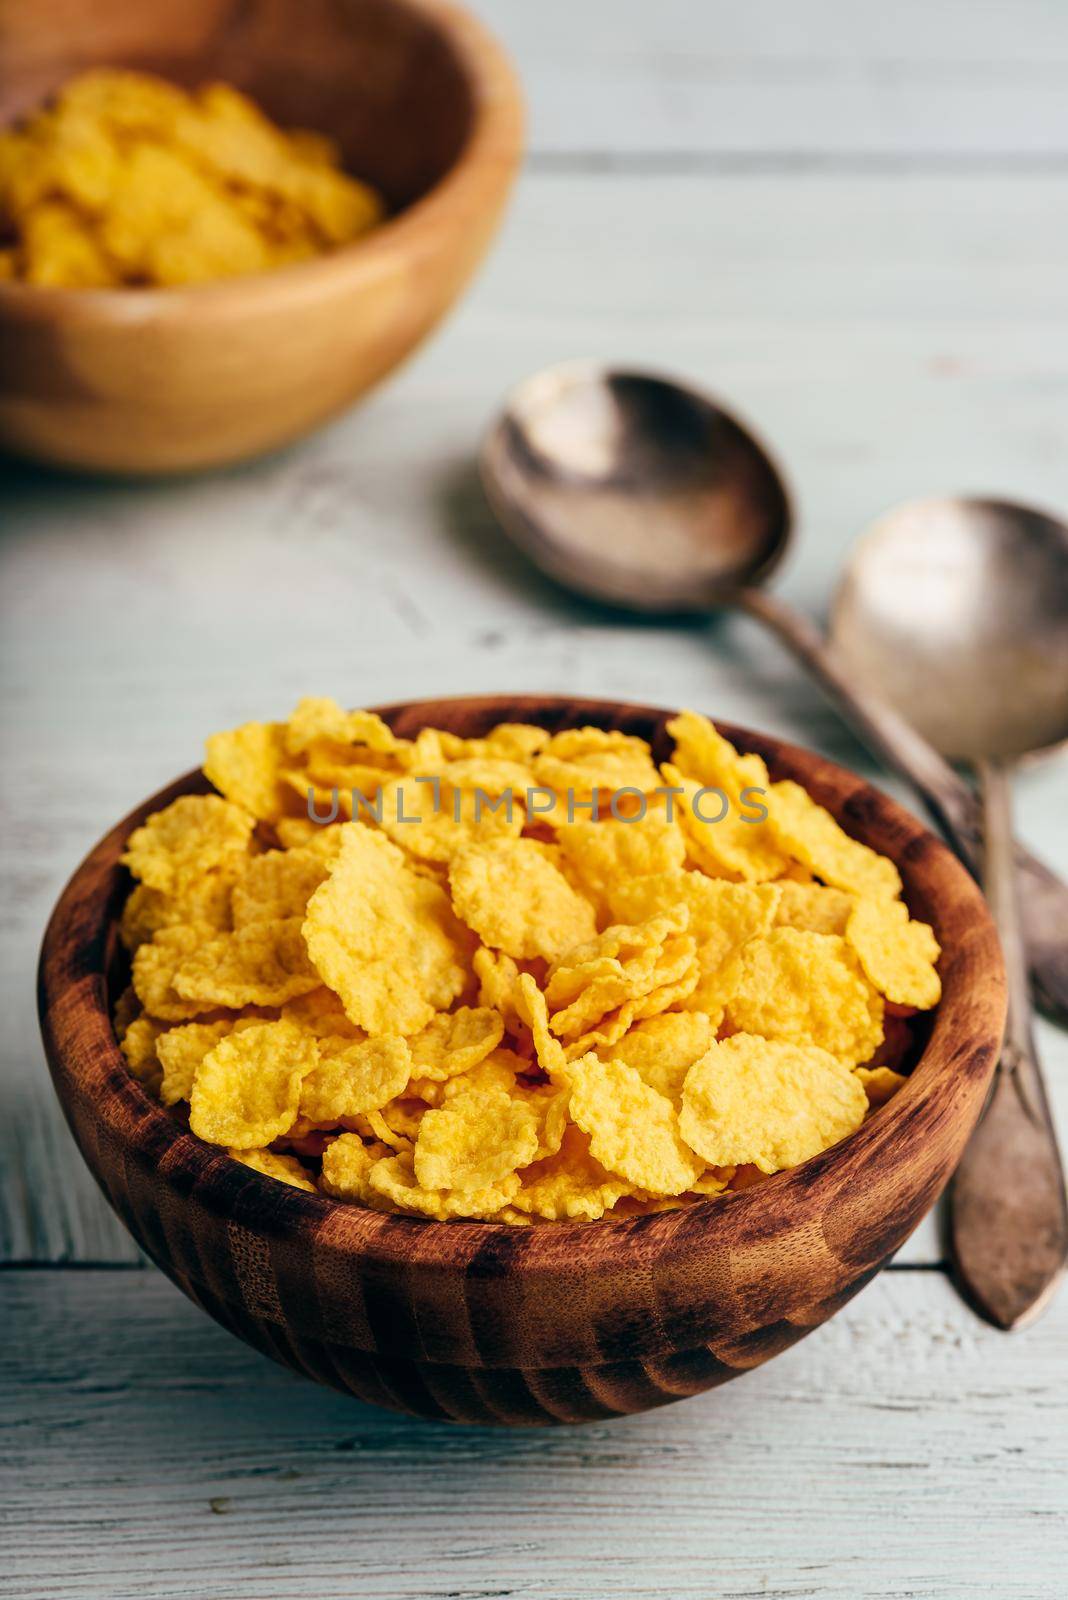 Rustic bowls of cornflakes with spoons on light wooden surface